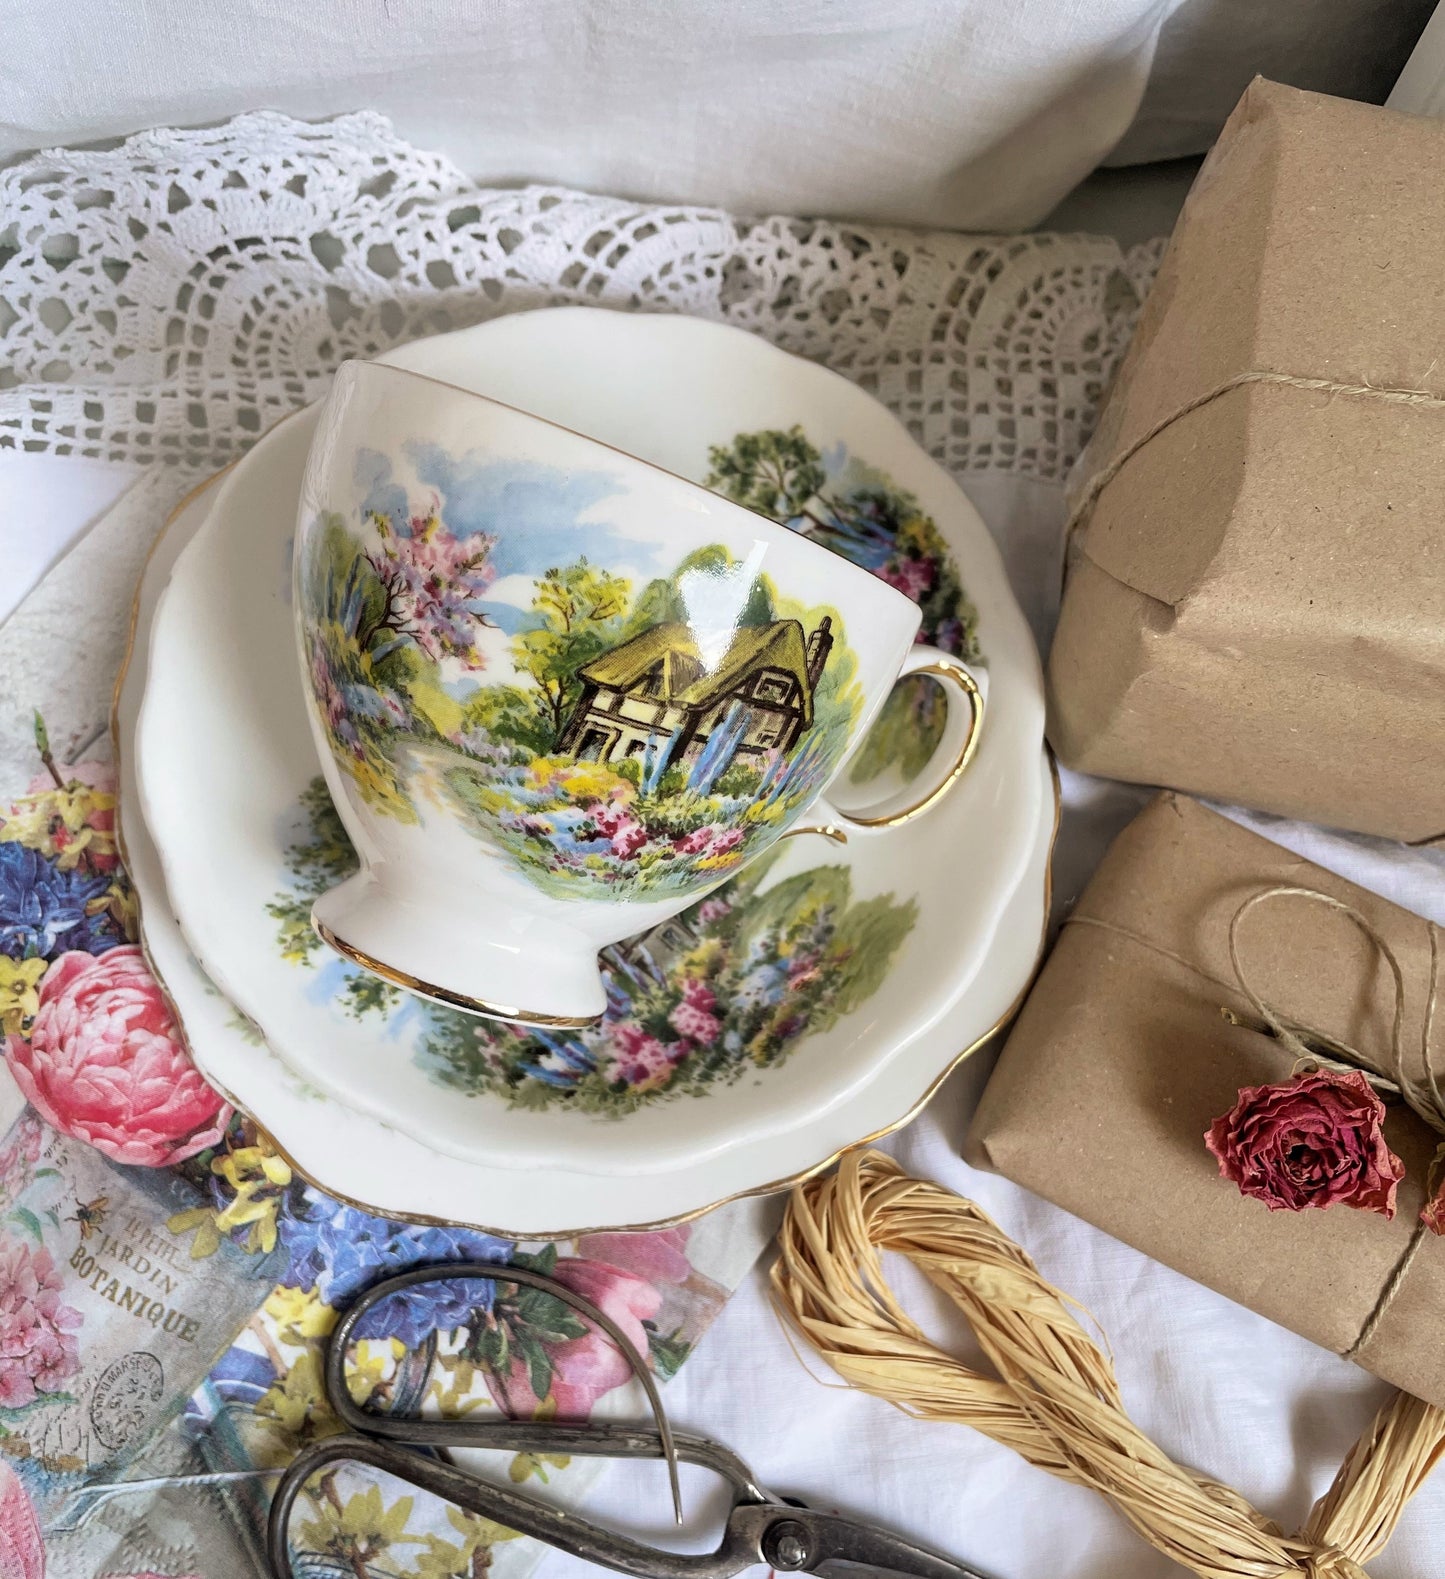 Vintage Country Cottage Teacup, Saucer and Tea Plate Trio